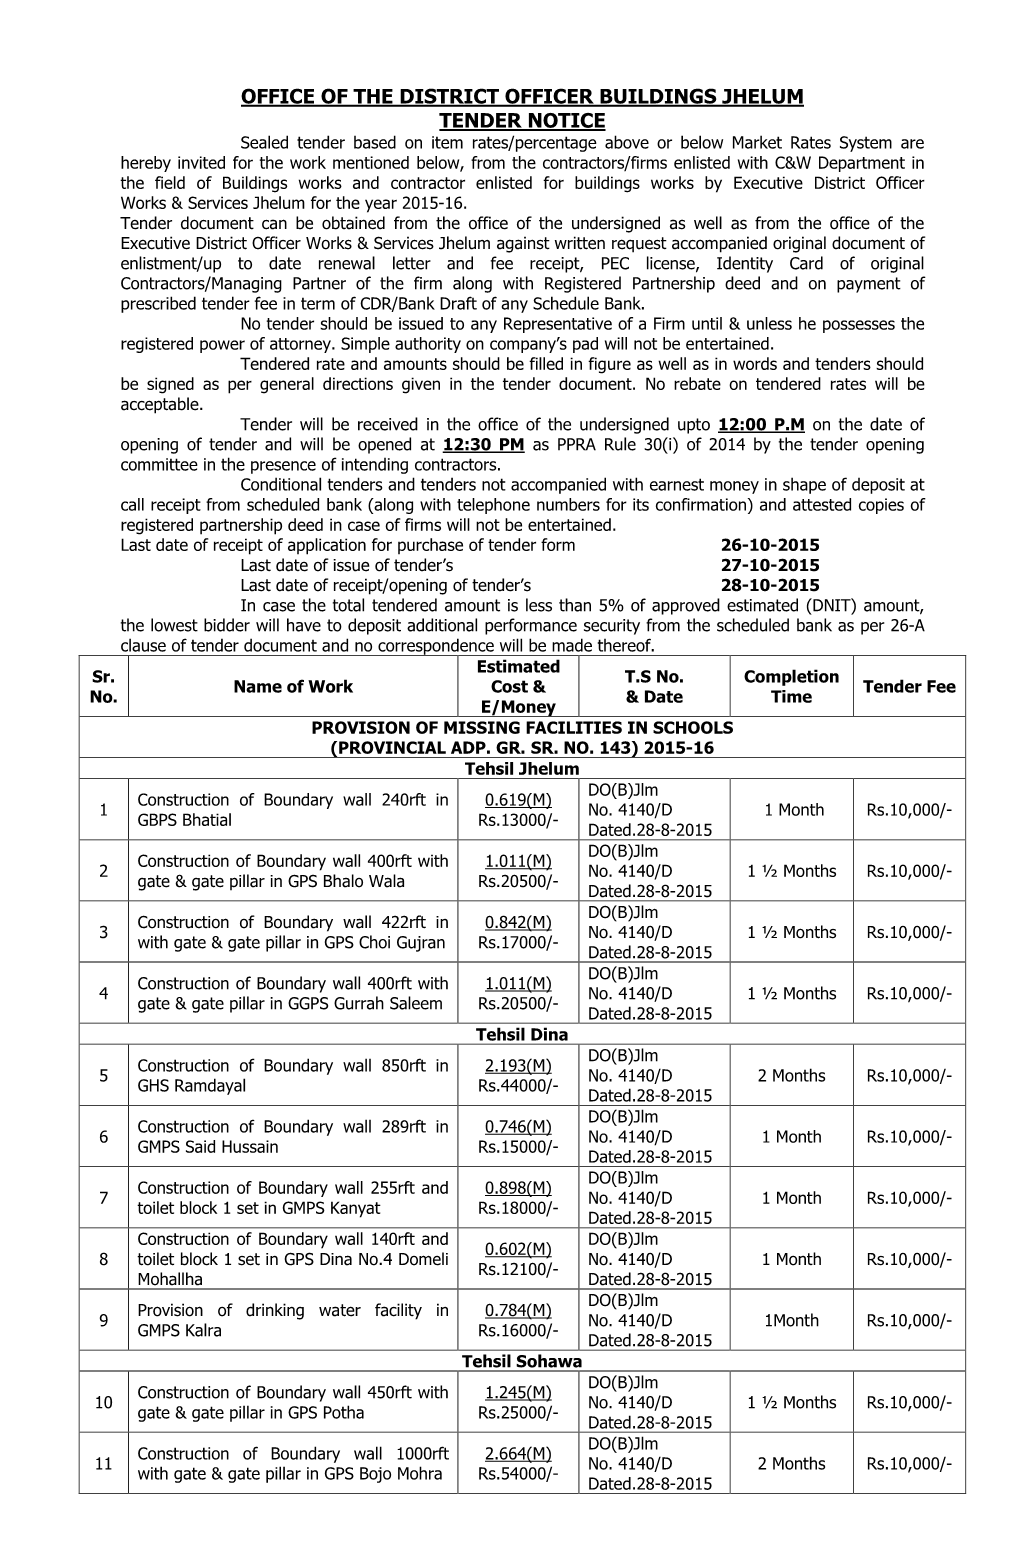 Office of the District Officer Buildings Jhelum Tender Notice